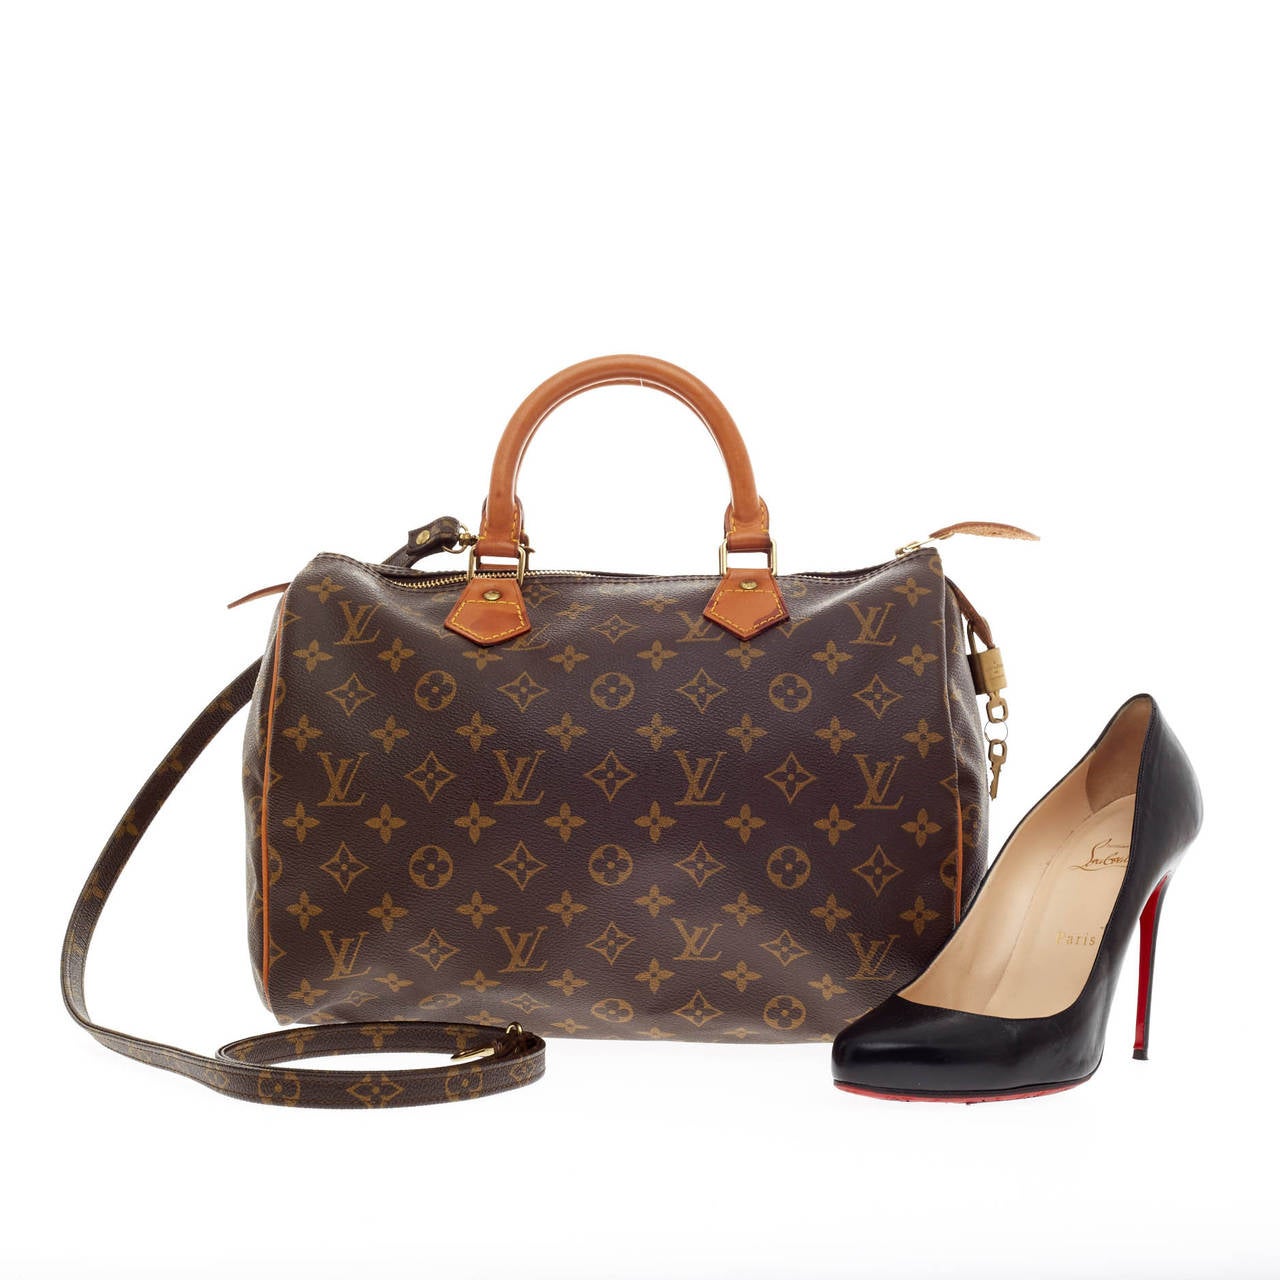 This authentic Louis Vuitton Speedy Bandouliere Monogram Canvas 30 is a classic must-have. Constructed in Louis Vuitton's classic monogram canvas print, this iconic Speedy is spacious and light, making it ideal to use everyday. It is finished with